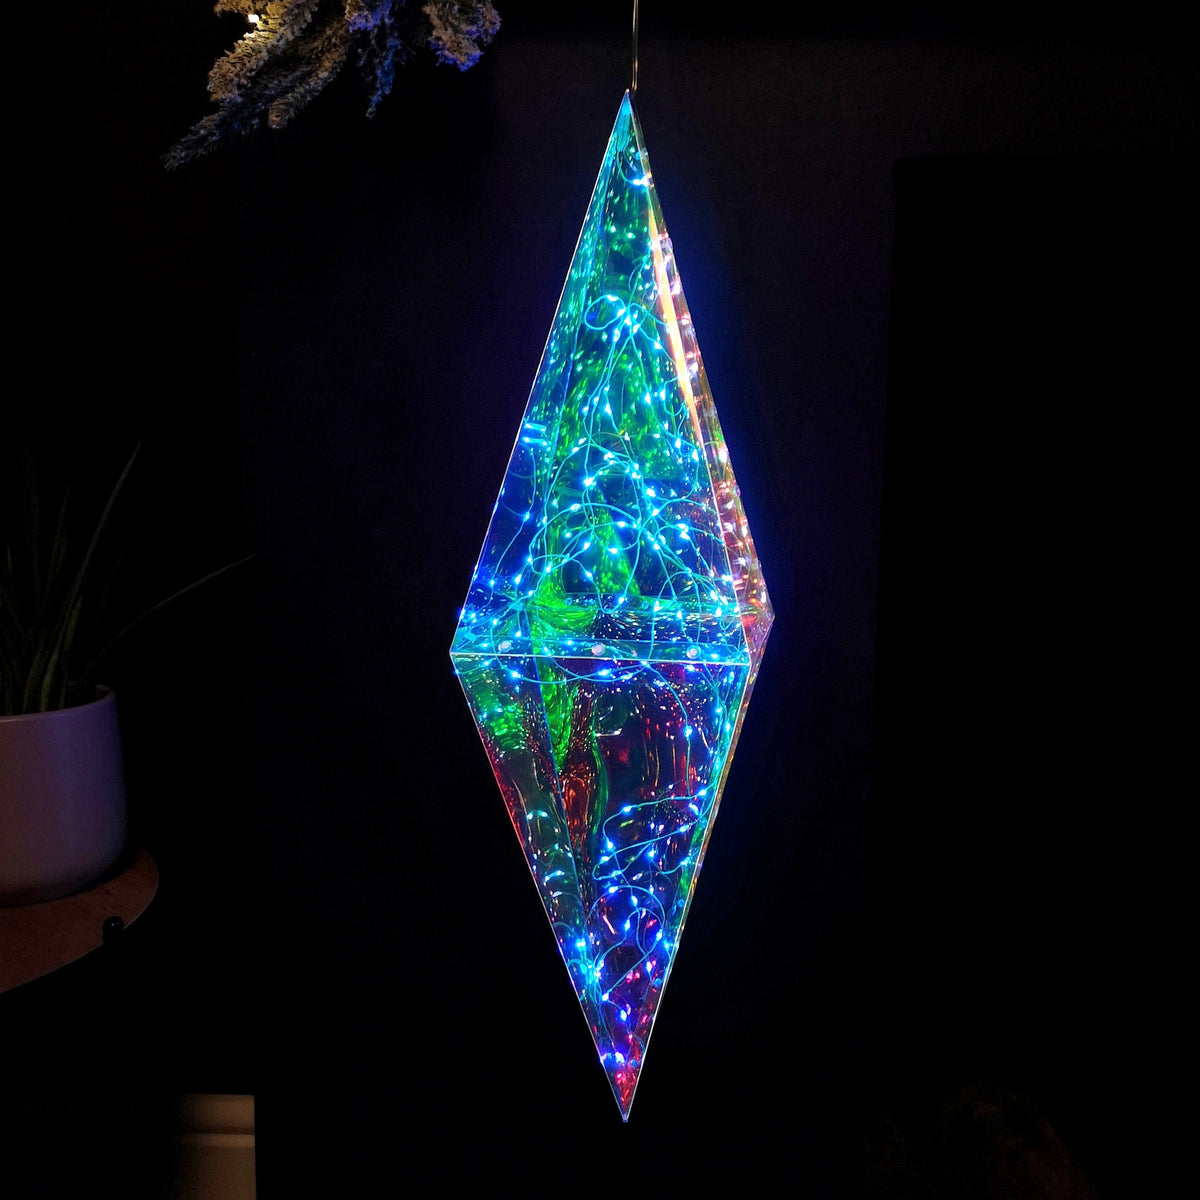 60cm Battery Operated Light up Hanging Christmas Dreamlight Diamond with 100 White LEDs